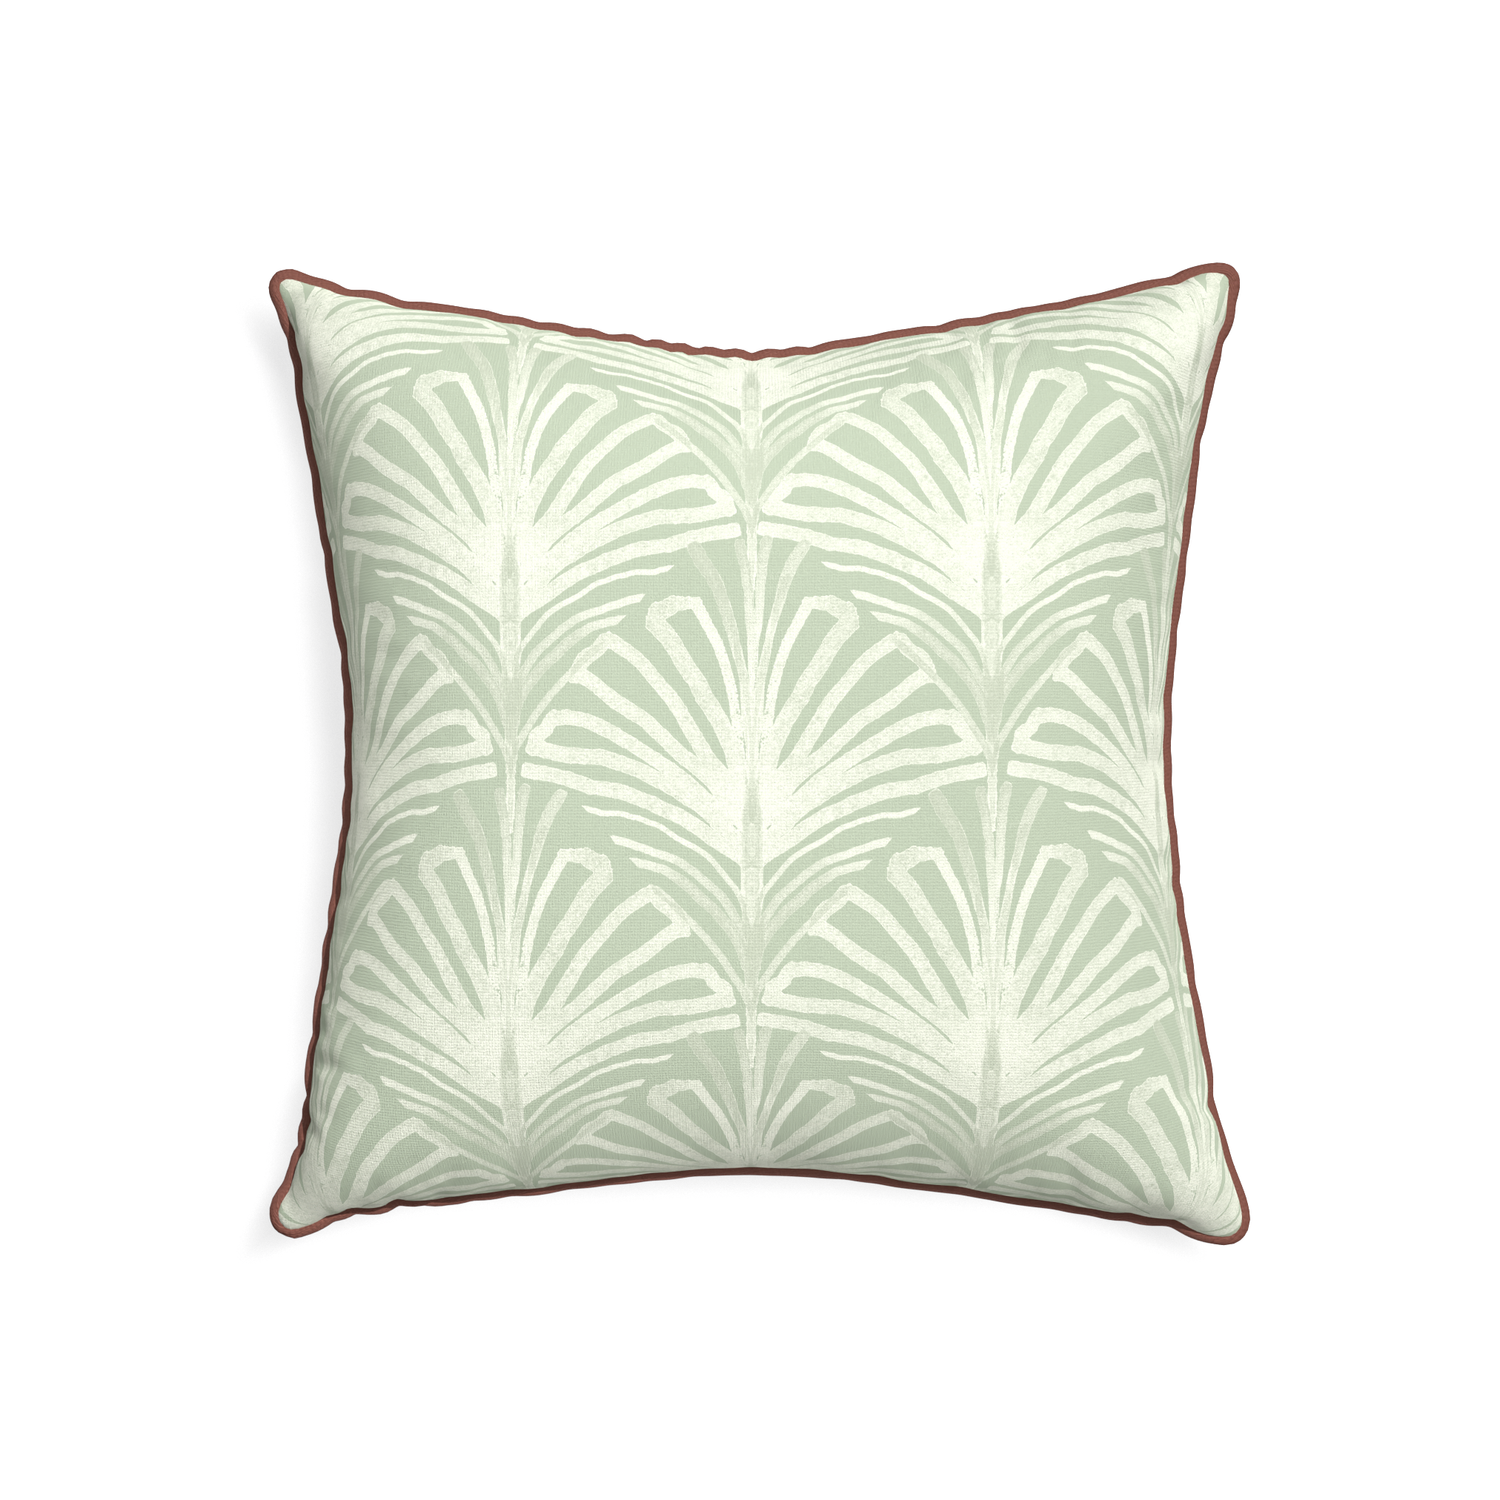 22-square suzy sage custom pillow with w piping on white background